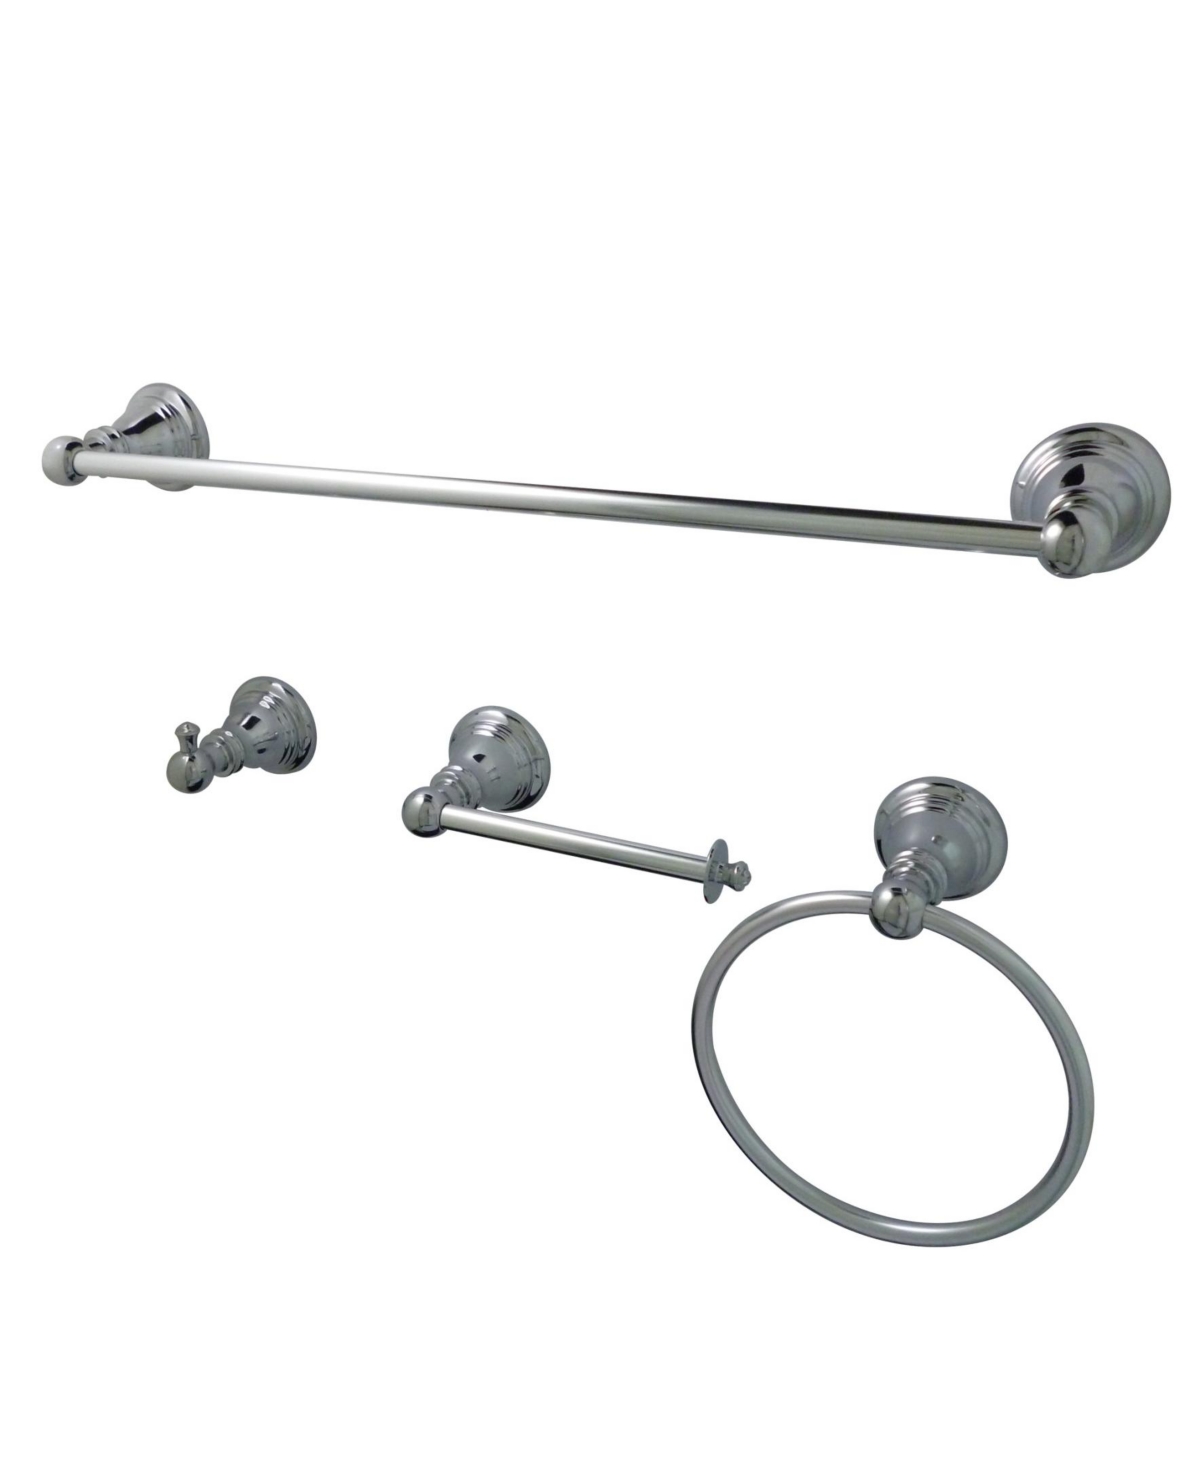 Kingston Brass American Classic 4-Pc. Bathroom Accessory Set in Polished Chrome Bedding